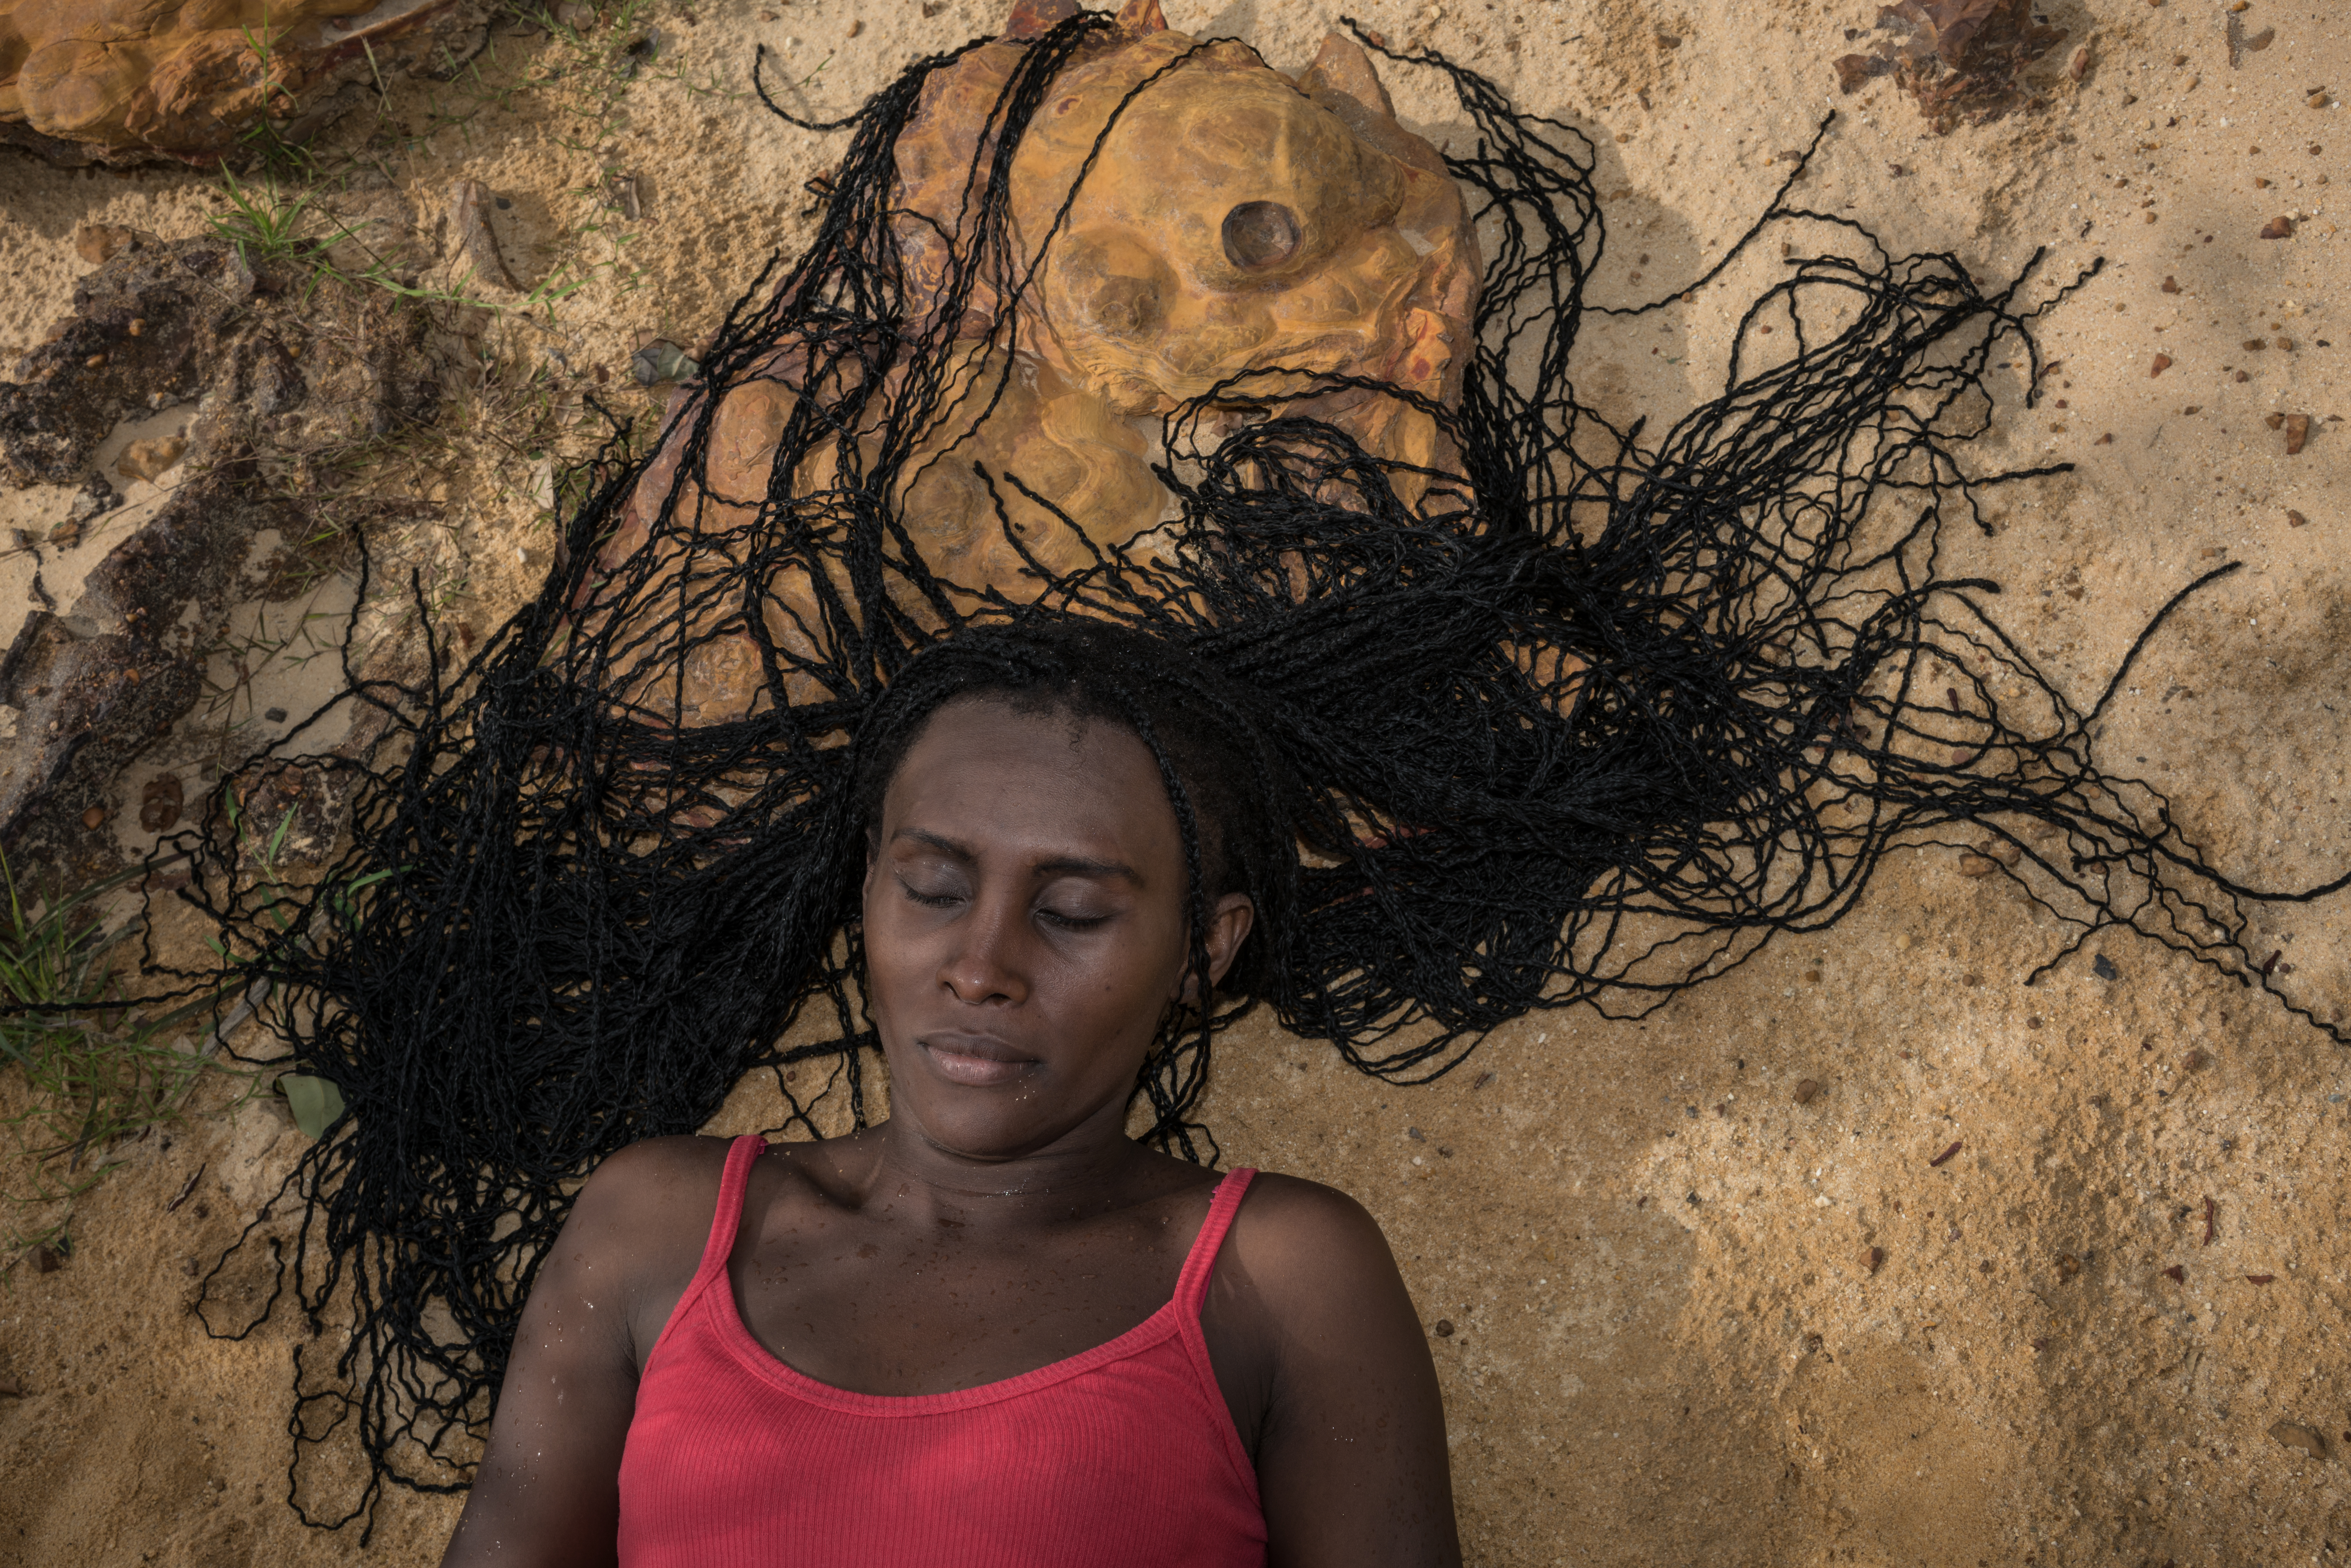 Juanita Escobar Photographs the Story of Women in a Conflict Zone